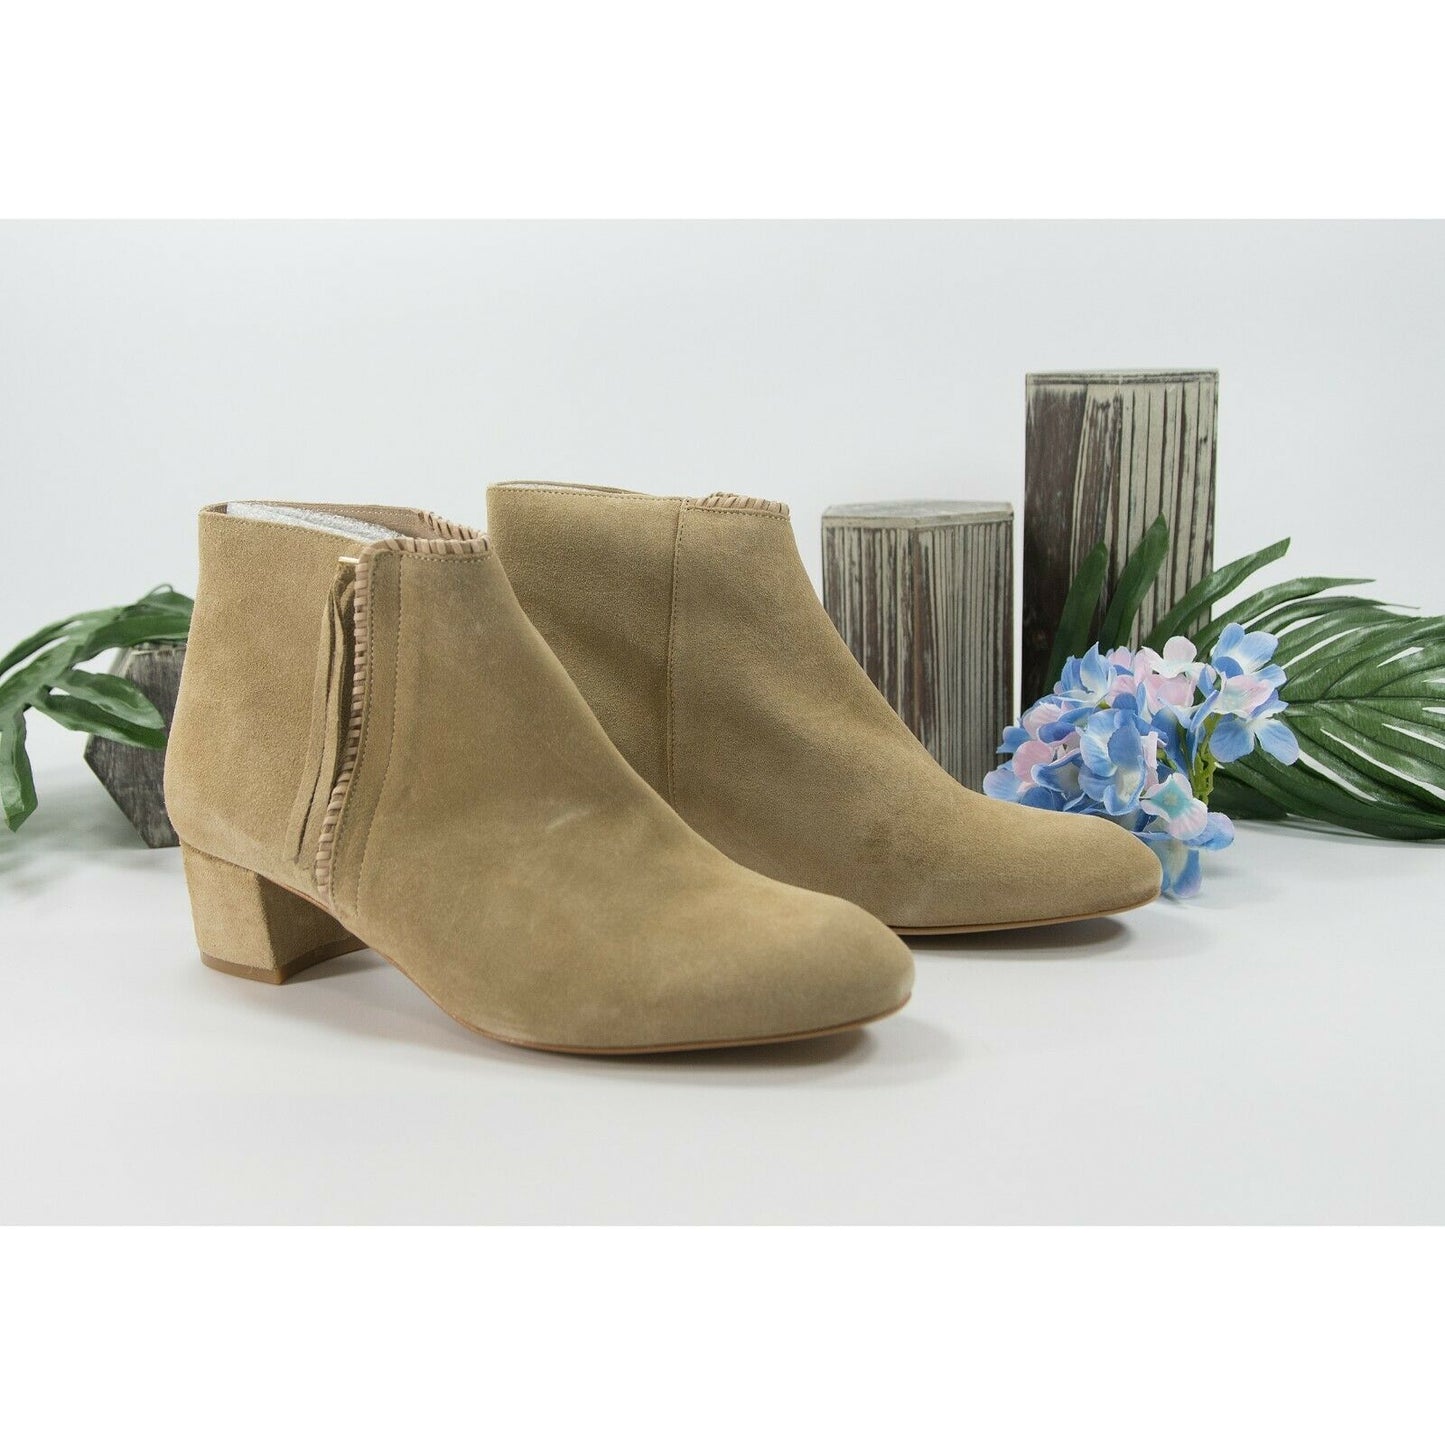 Maje Camel Suede Felicia Bootie Ankle Boot Shoes Sz 39 9